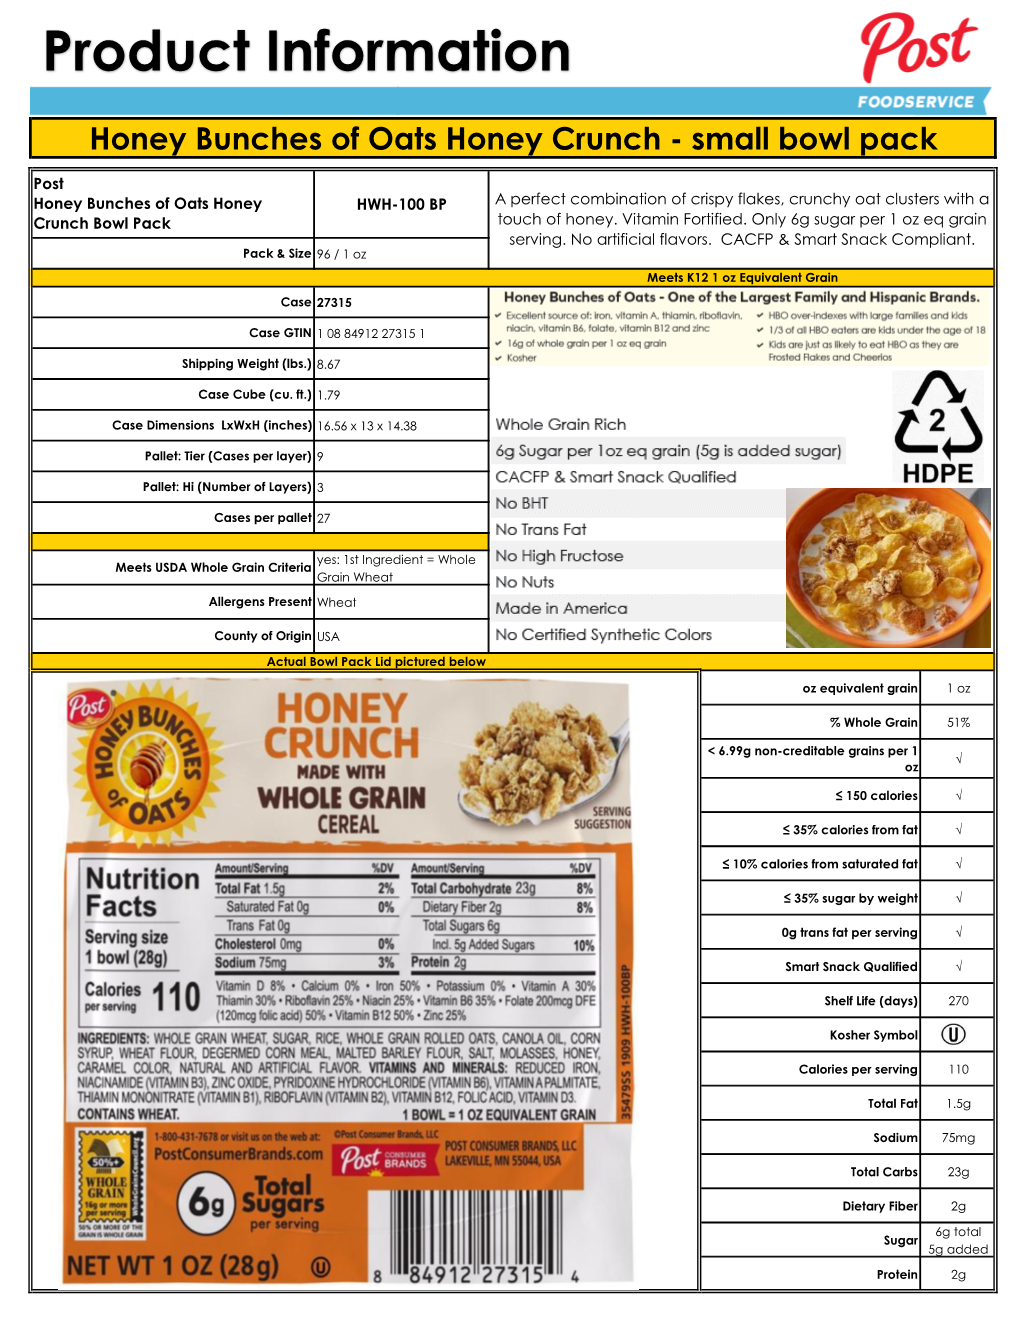 Honey Bunches of Oats Honey Crunch - Small Bowl Pack